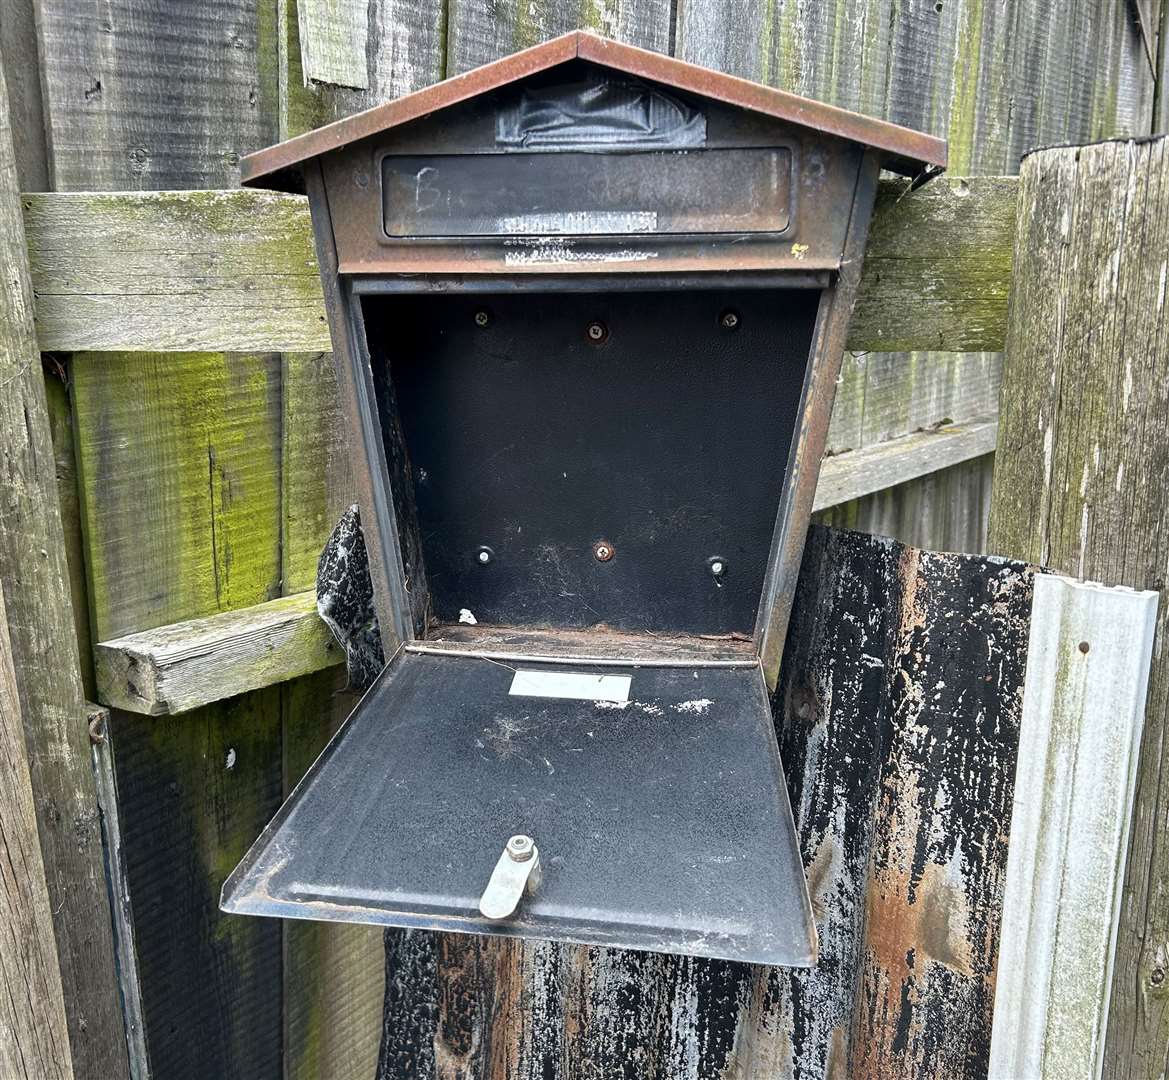 The letterbox in Staple, between Canterbury and Sandwich, was home to nesting great tits